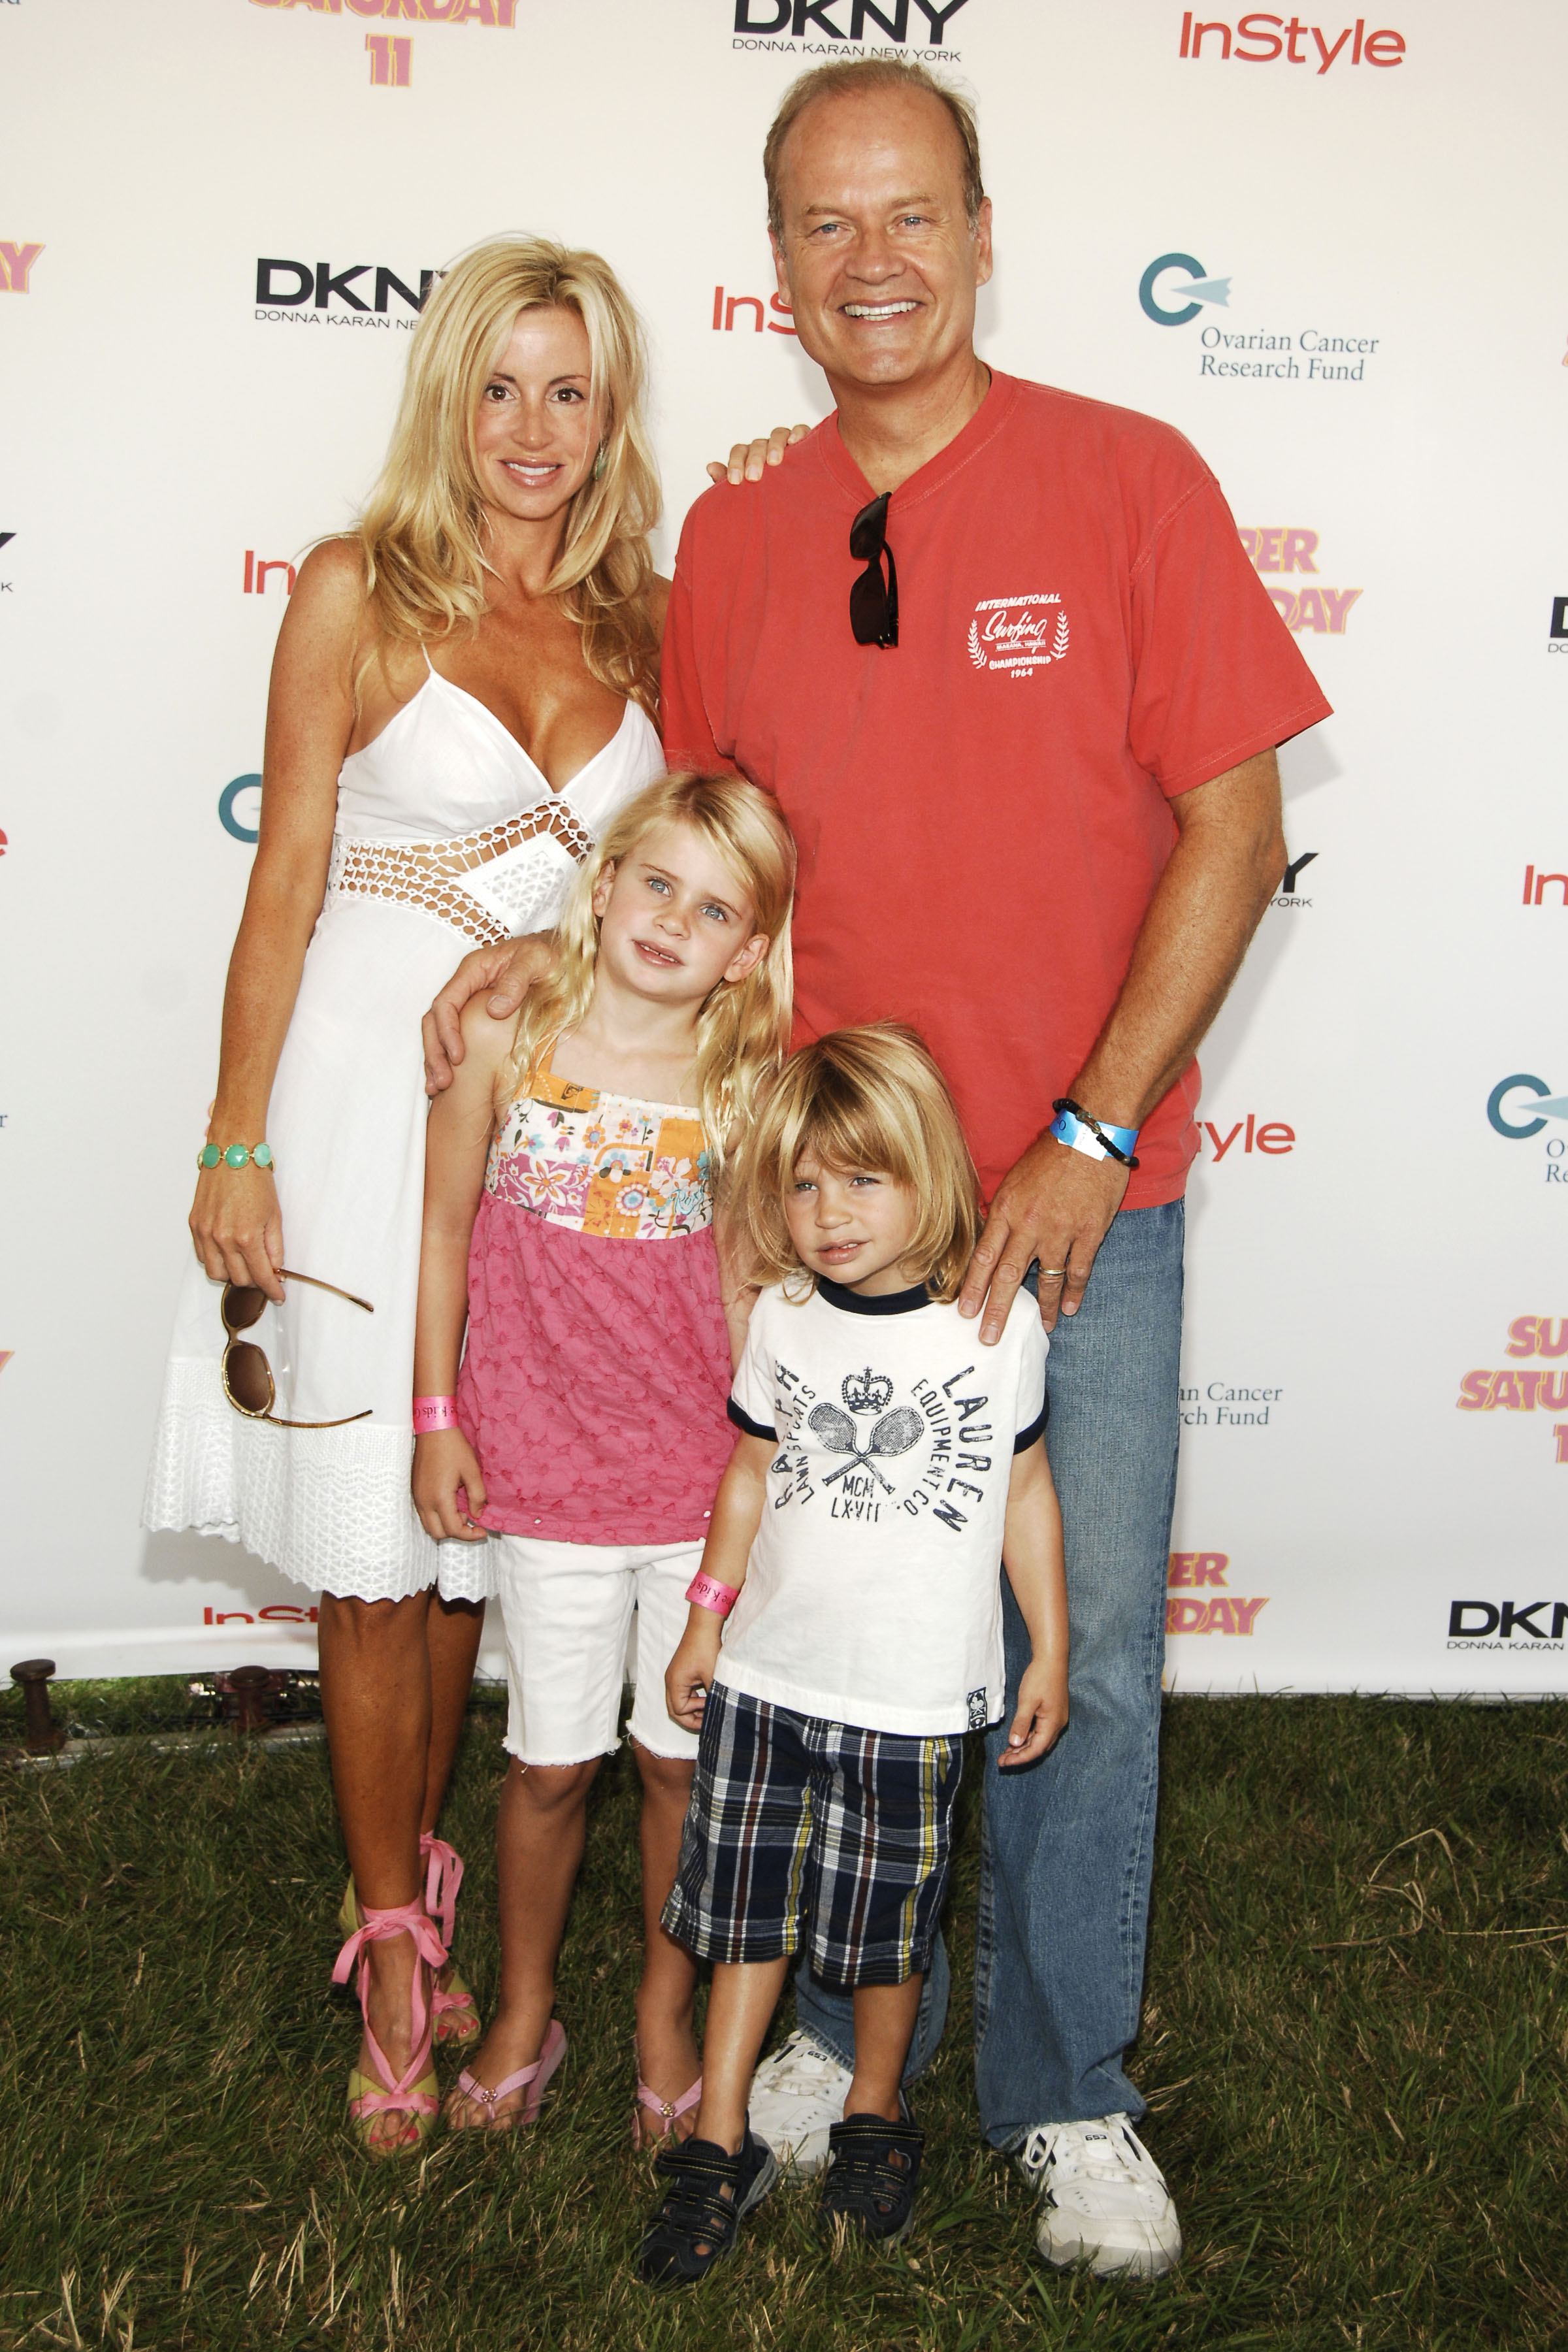 Camille Grammer, Kelsey Grammer, and children Mason and Jude on July 26, 2008 in Watermill, New York | Source: Getty Images